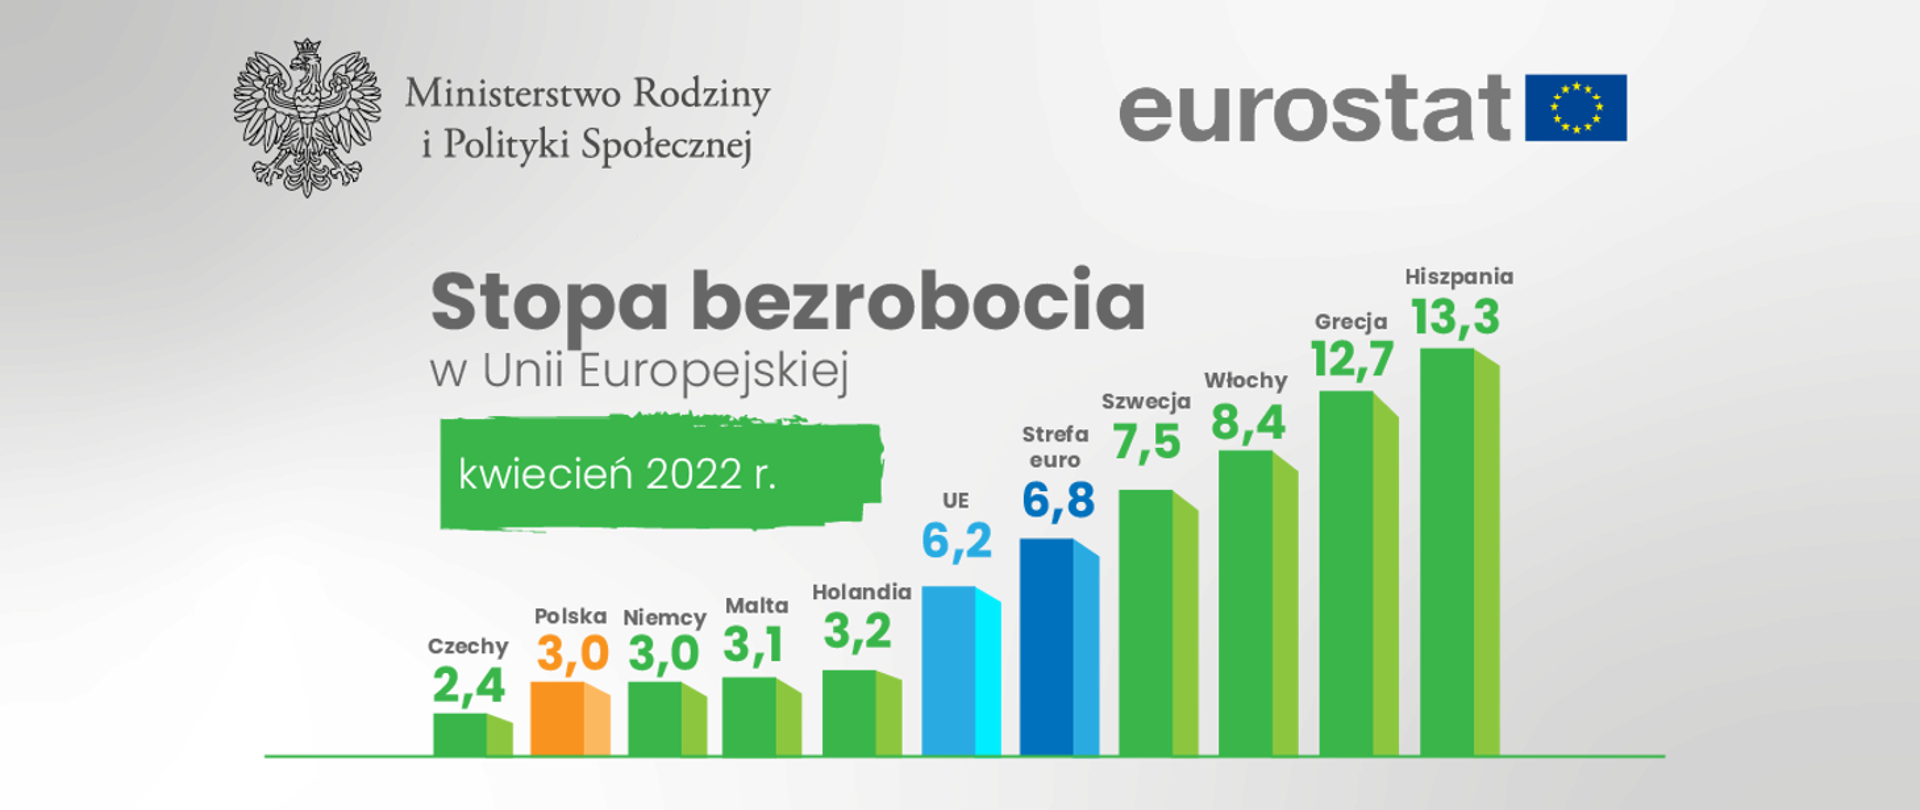 Eurostat: in April, the unemployment rate in Poland amounted to 3%.